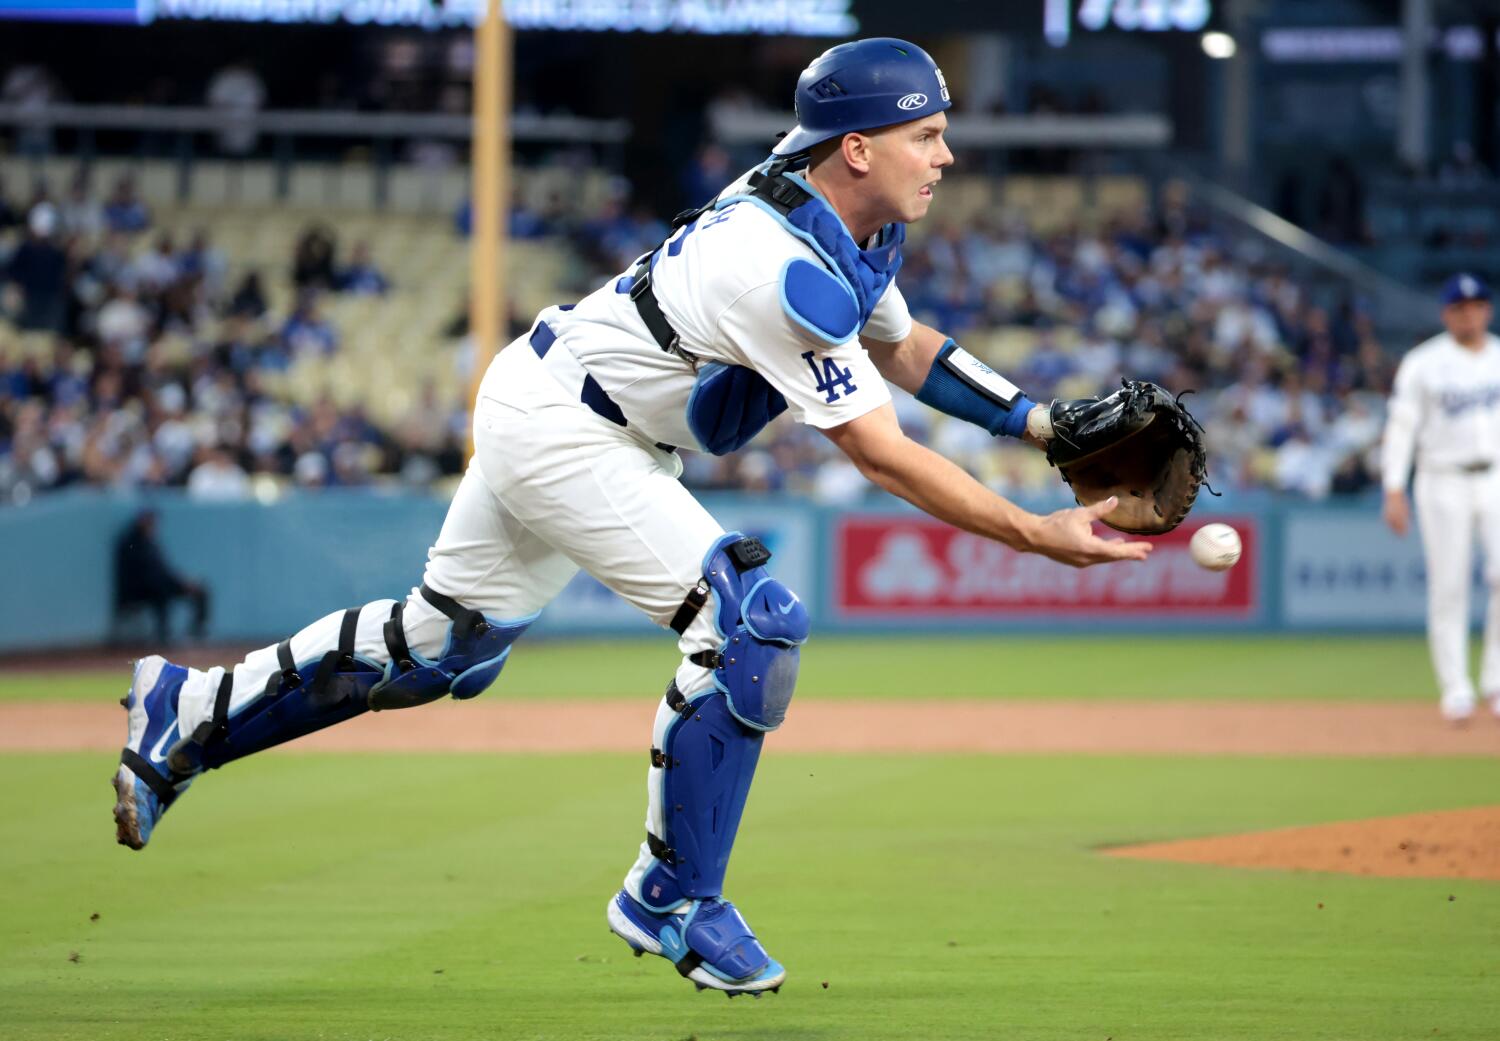 Shaky defense the latest problem to afflict struggling Dodgers in loss to Mets